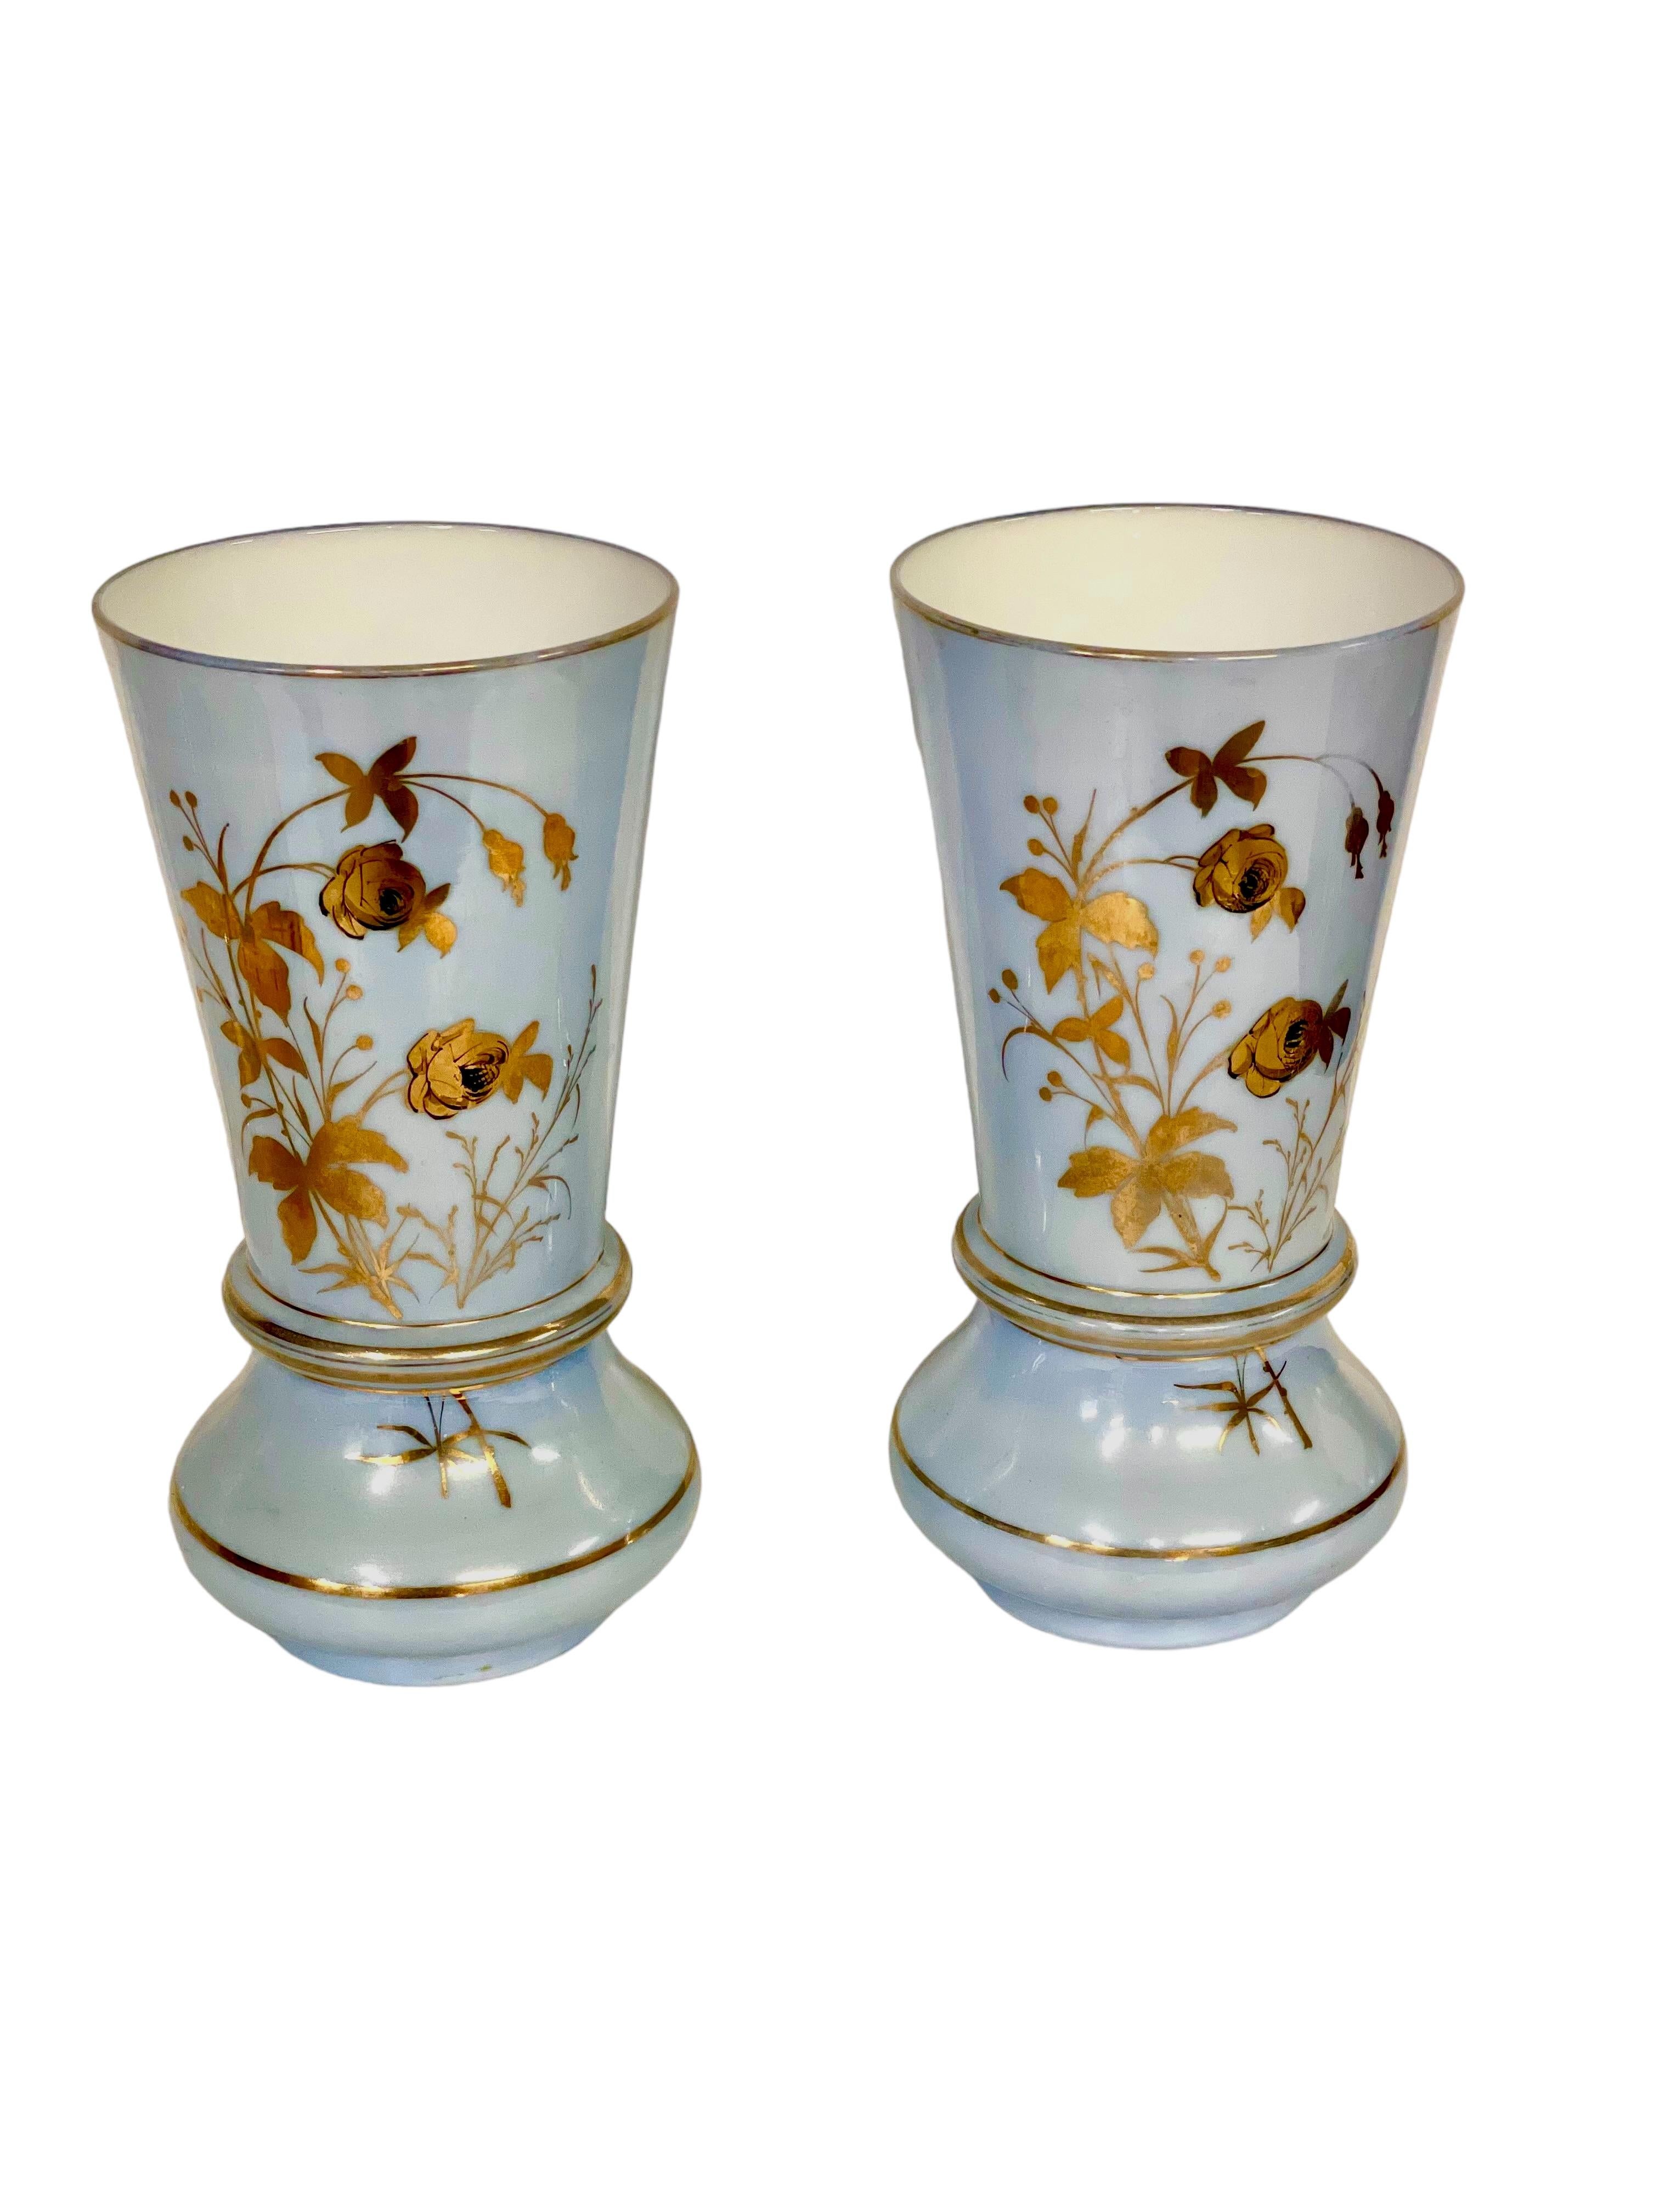 Pair of Large Gilt and Pale Blue Opaline Vases, Napoleon III Period For Sale 5